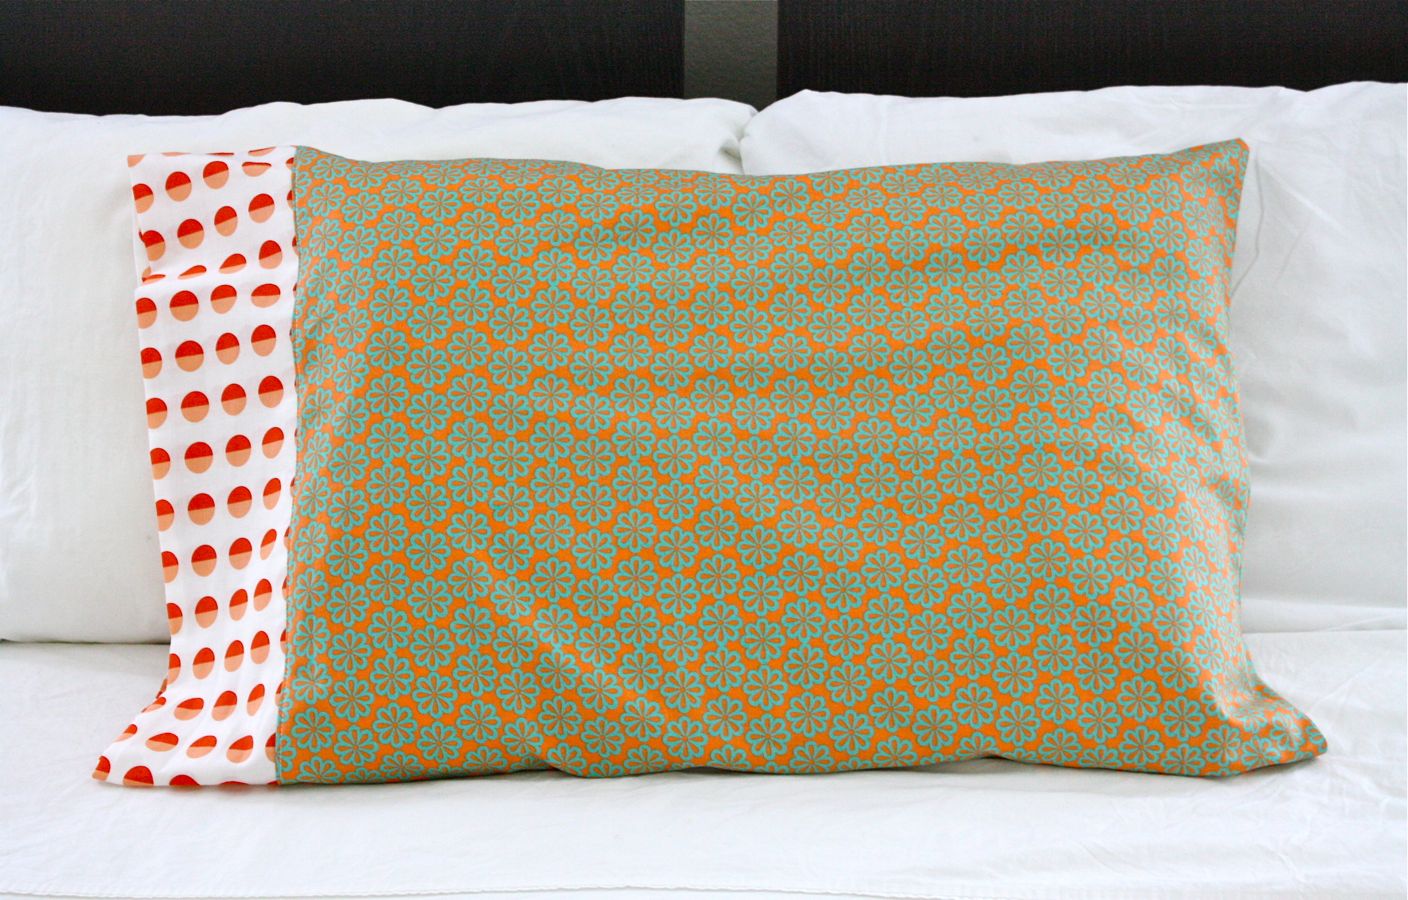 How To Make A King Pillowcase To Fit A Standard Pillow